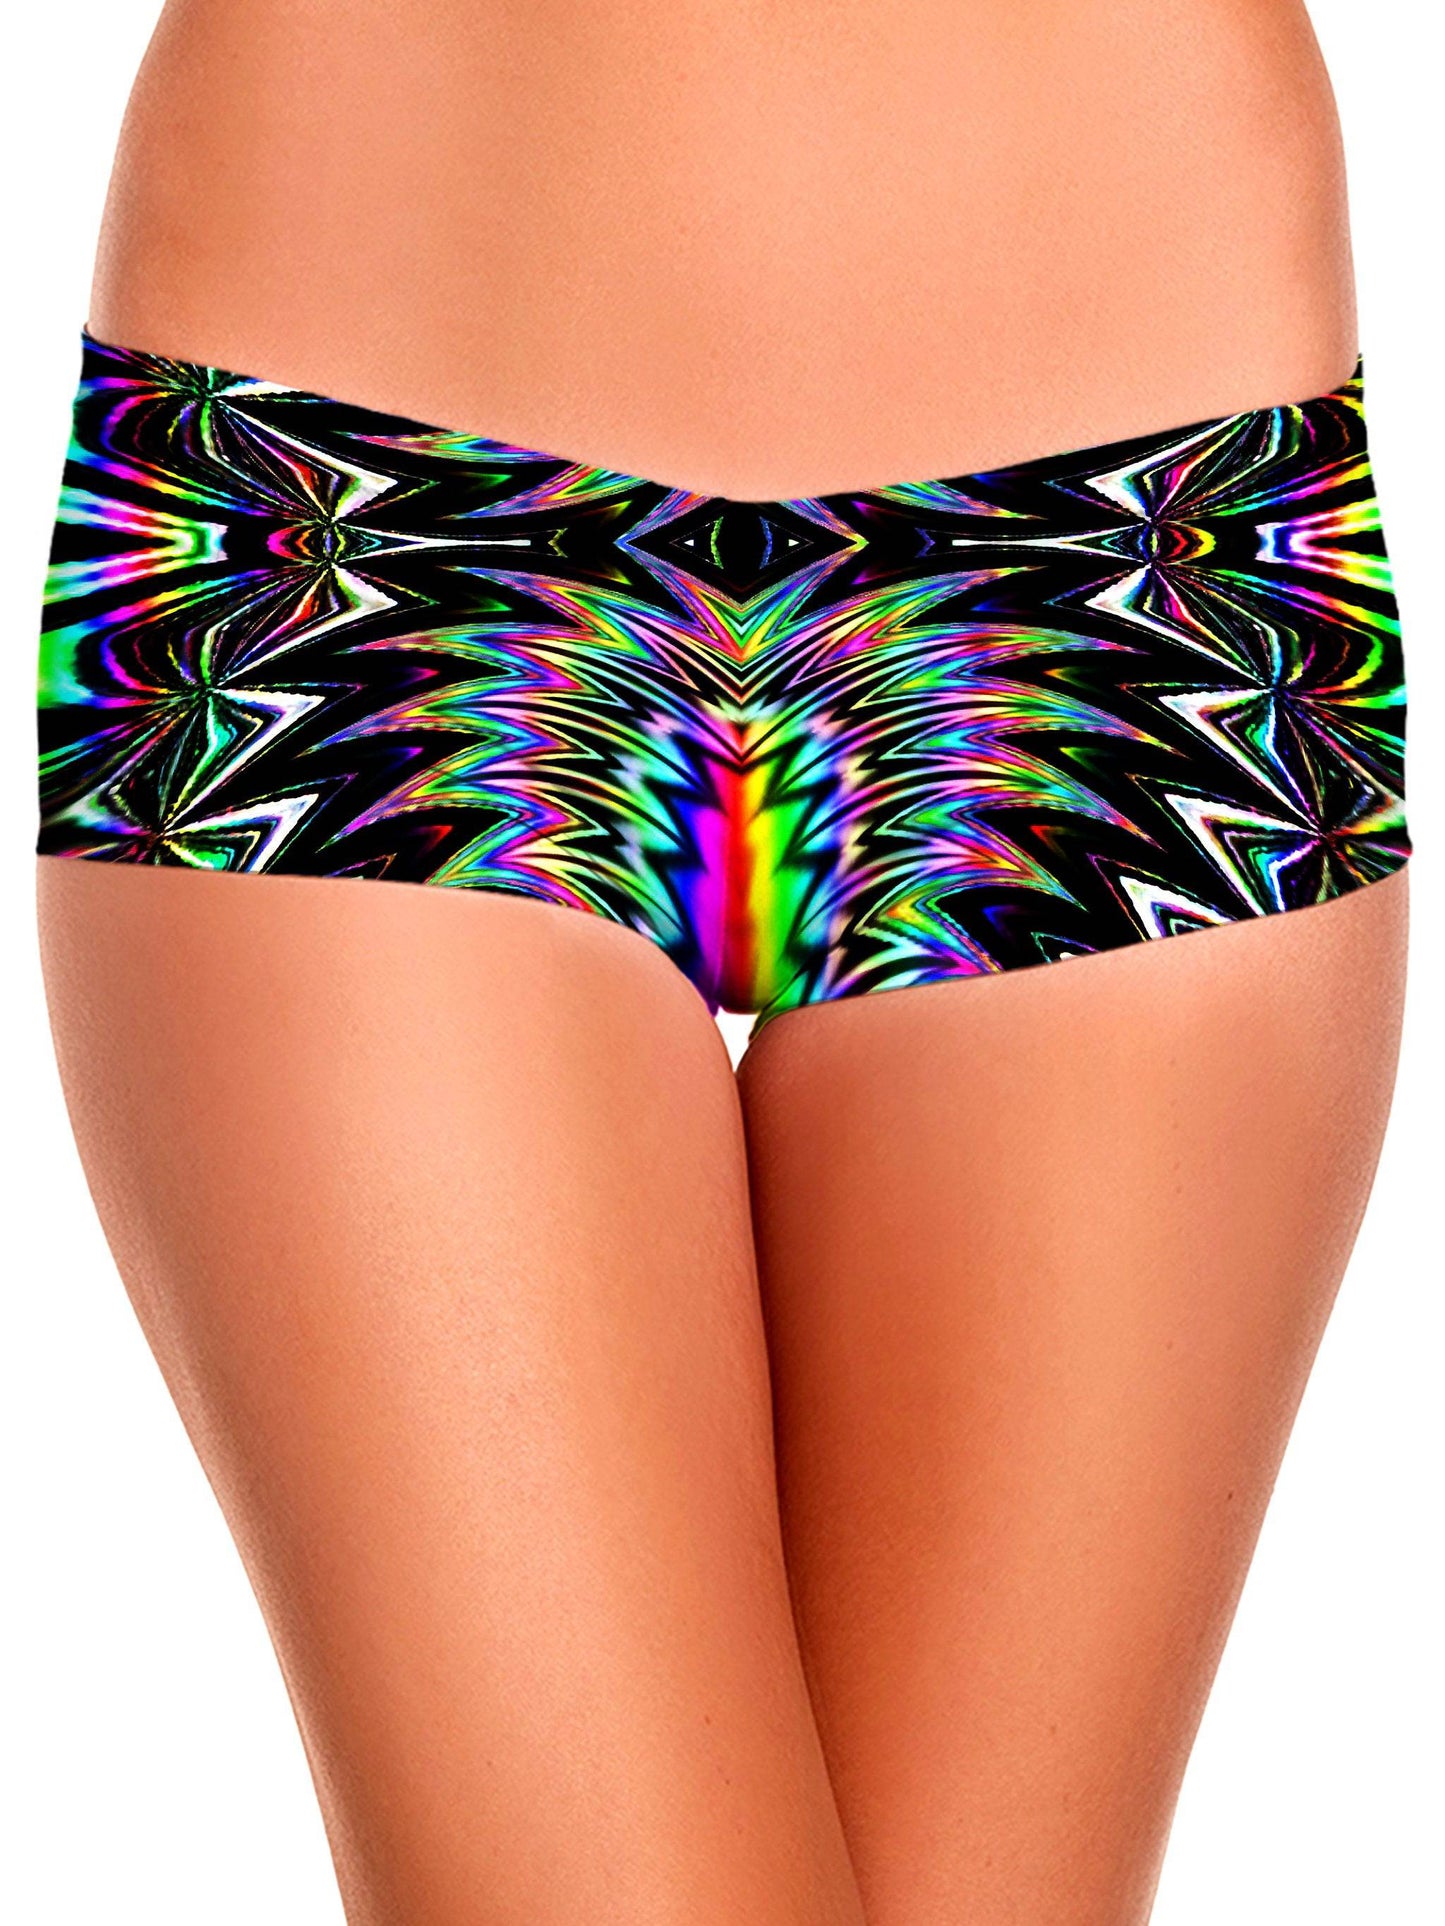 Growth Booty Shorts, Glass Prism Studios, | iEDM